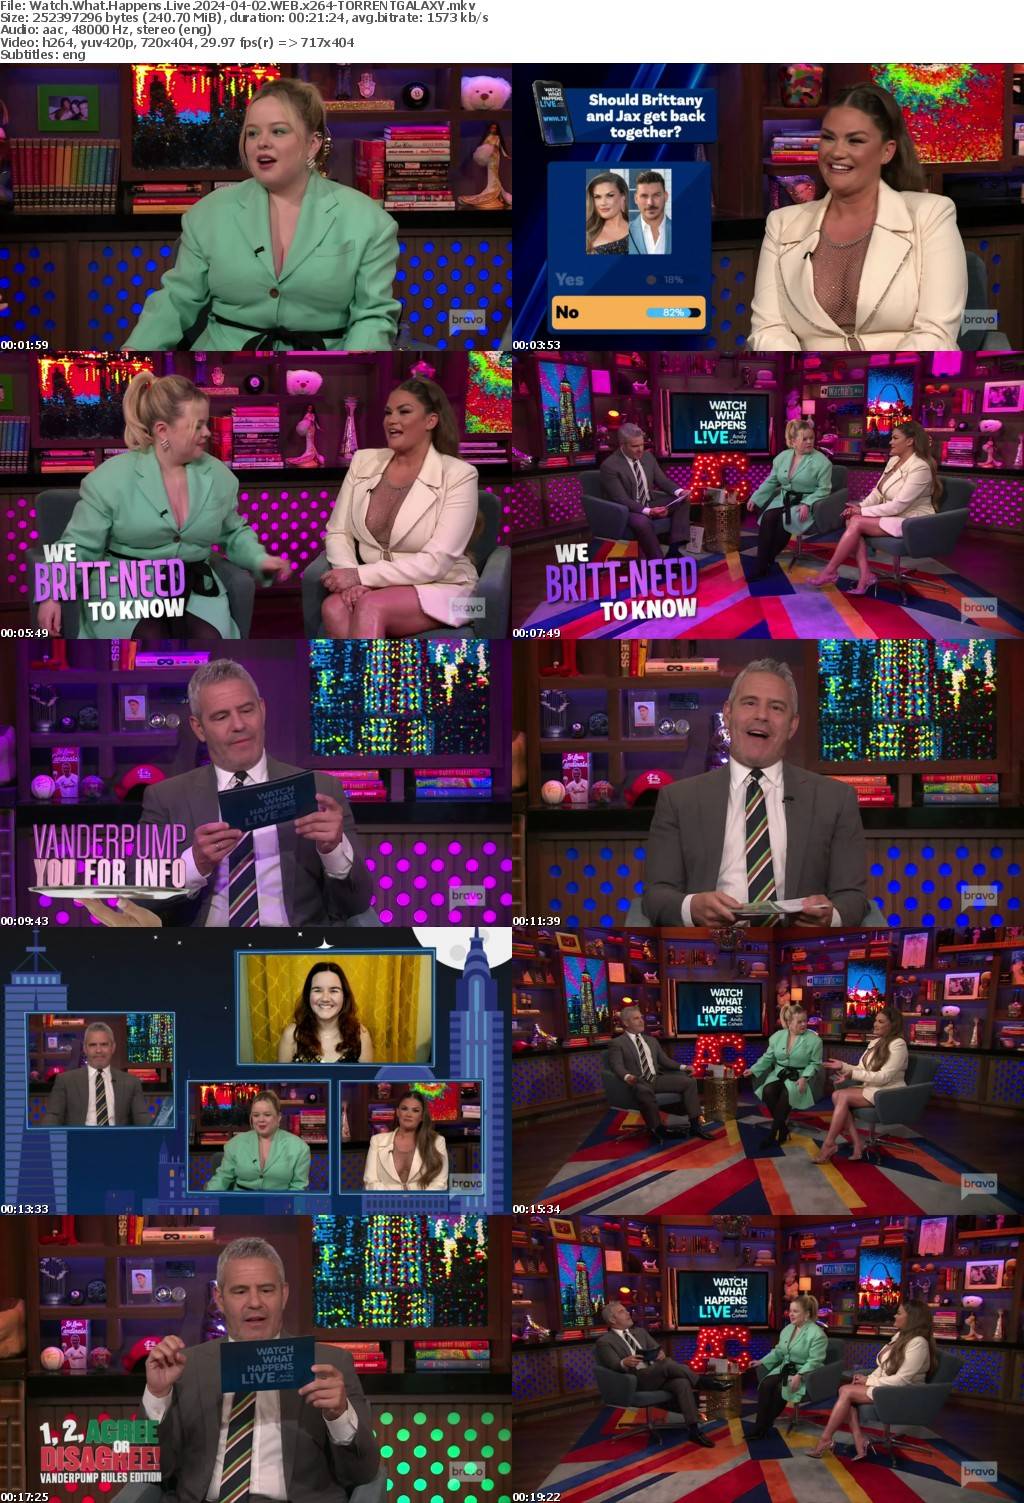 Watch What Happens Live 2024-04-02 WEB x264-GALAXY